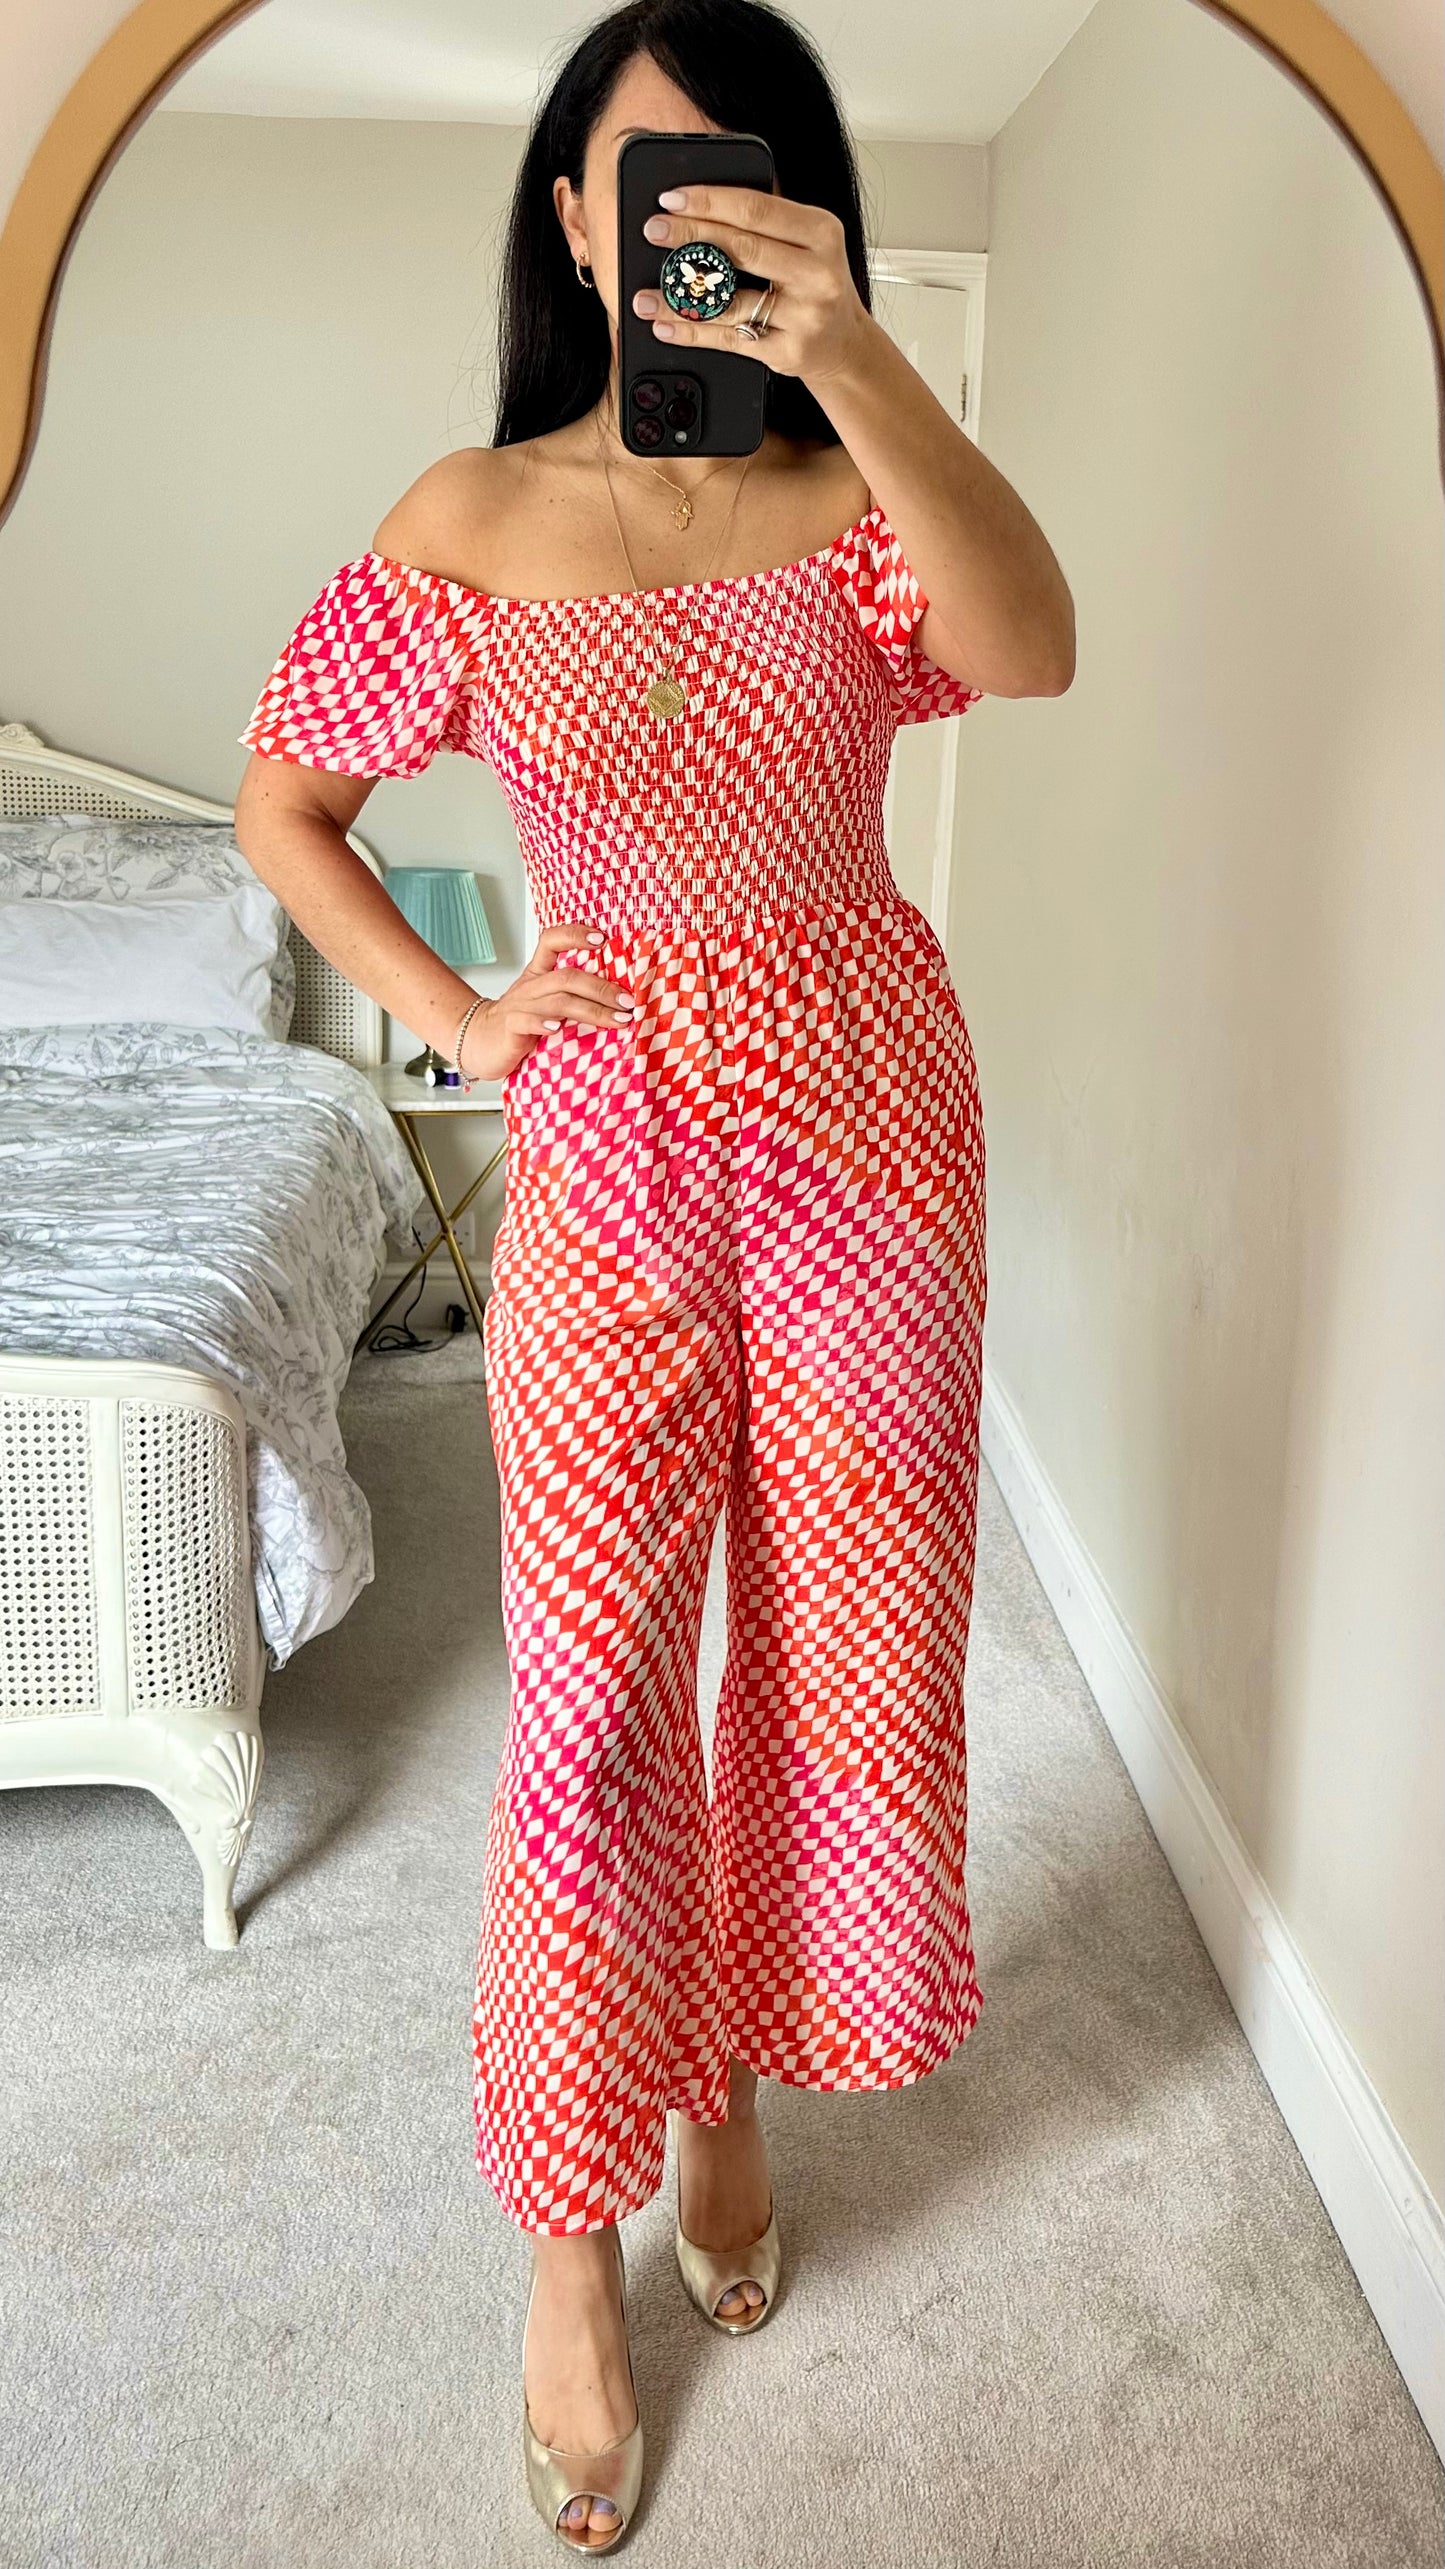 Grace Holliday for Anthropologie jumpsuit Playsuit red orange white gingham check small UK 8-10 vgc